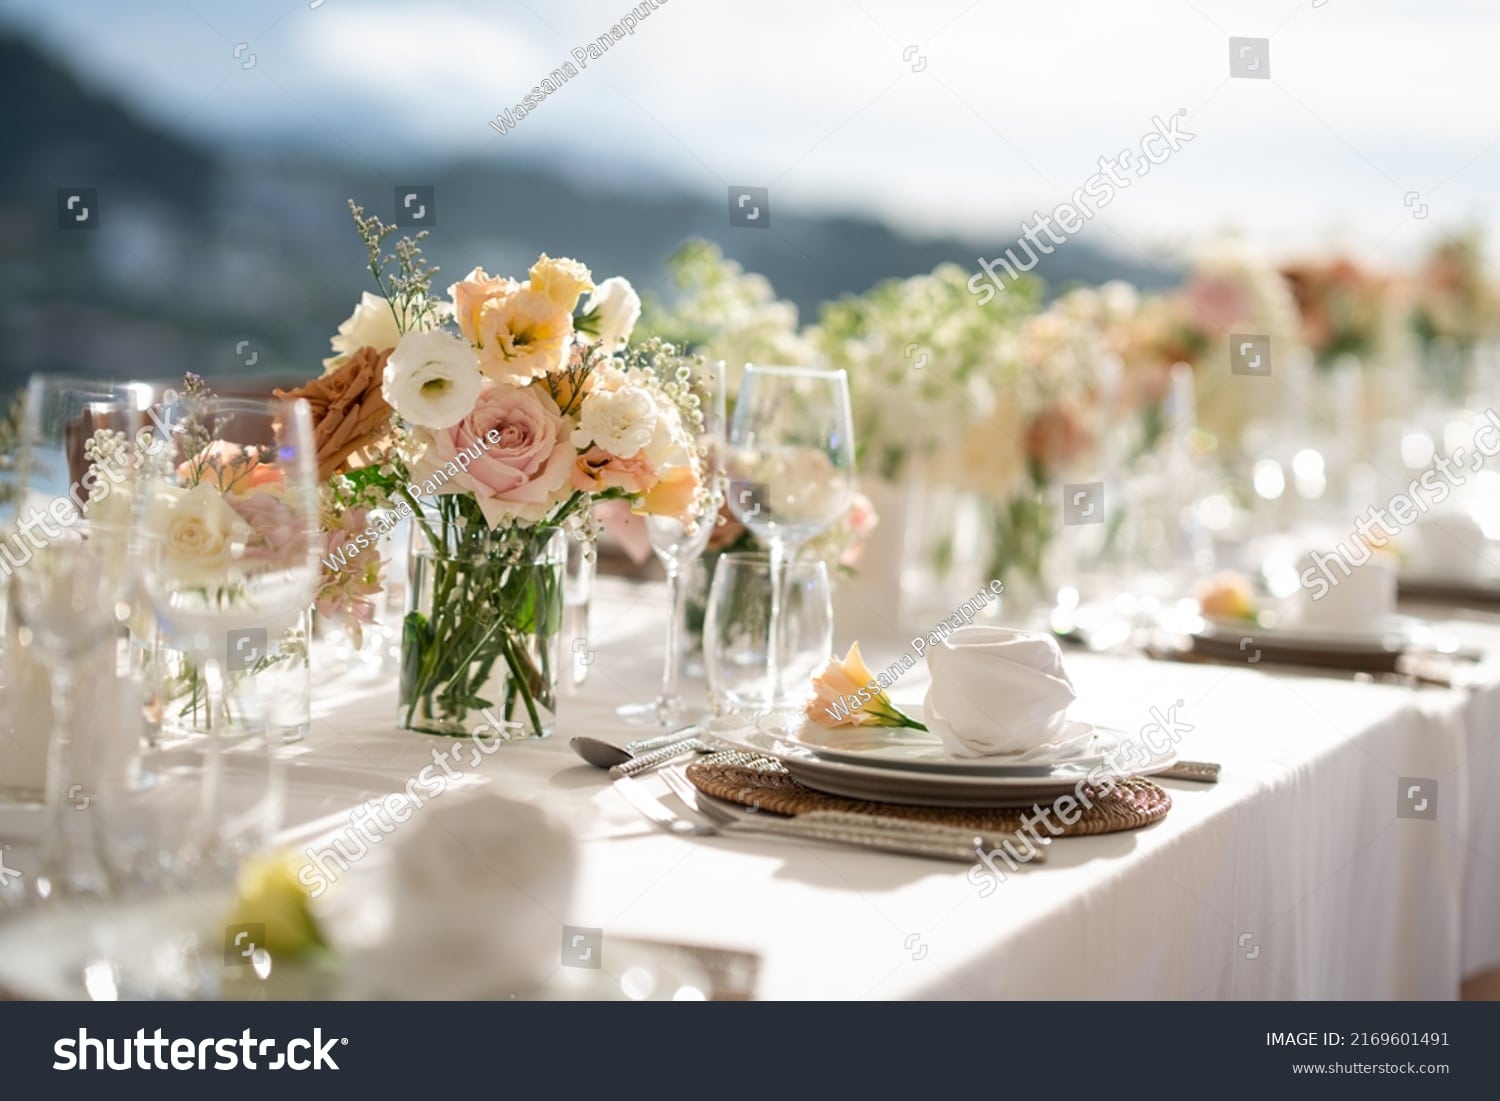 stock-photo-beautiful-flowers-decorated-on-the-table-tables-set-for-an-event-party-or-wedding-reception-luxury-2169601491